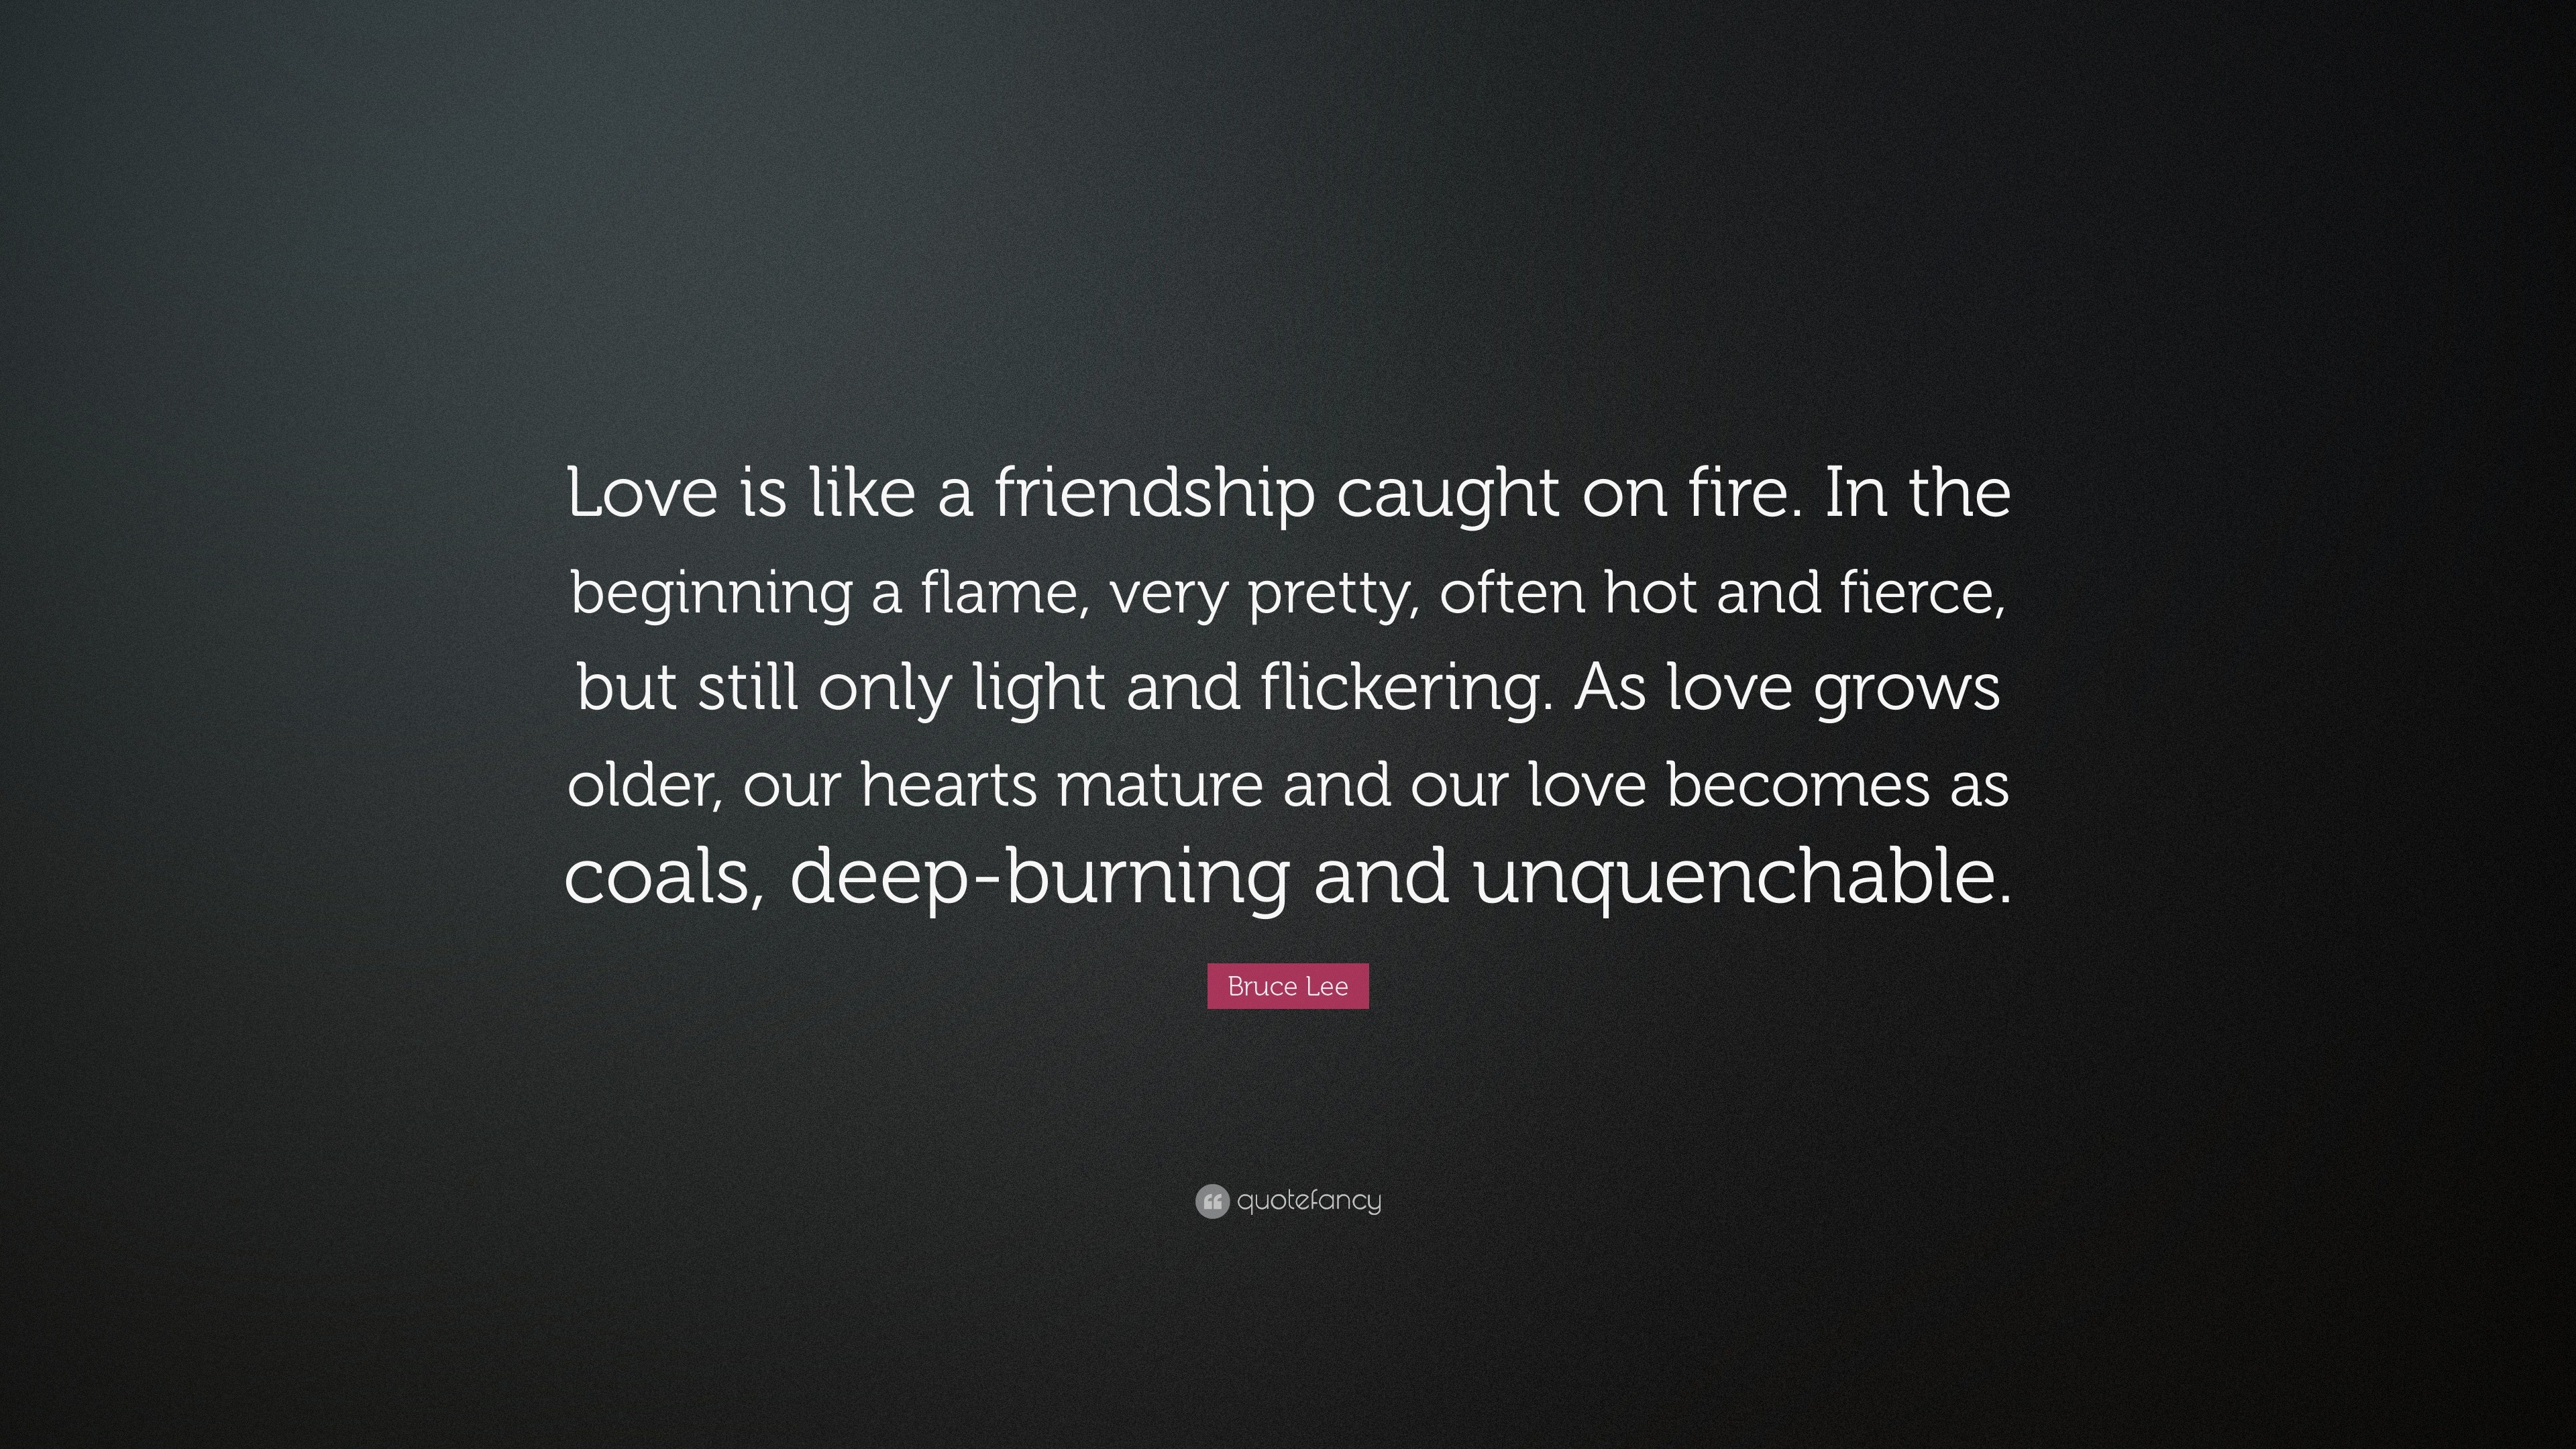 Bruce Lee Quote “Love is like a friendship caught on fire In the